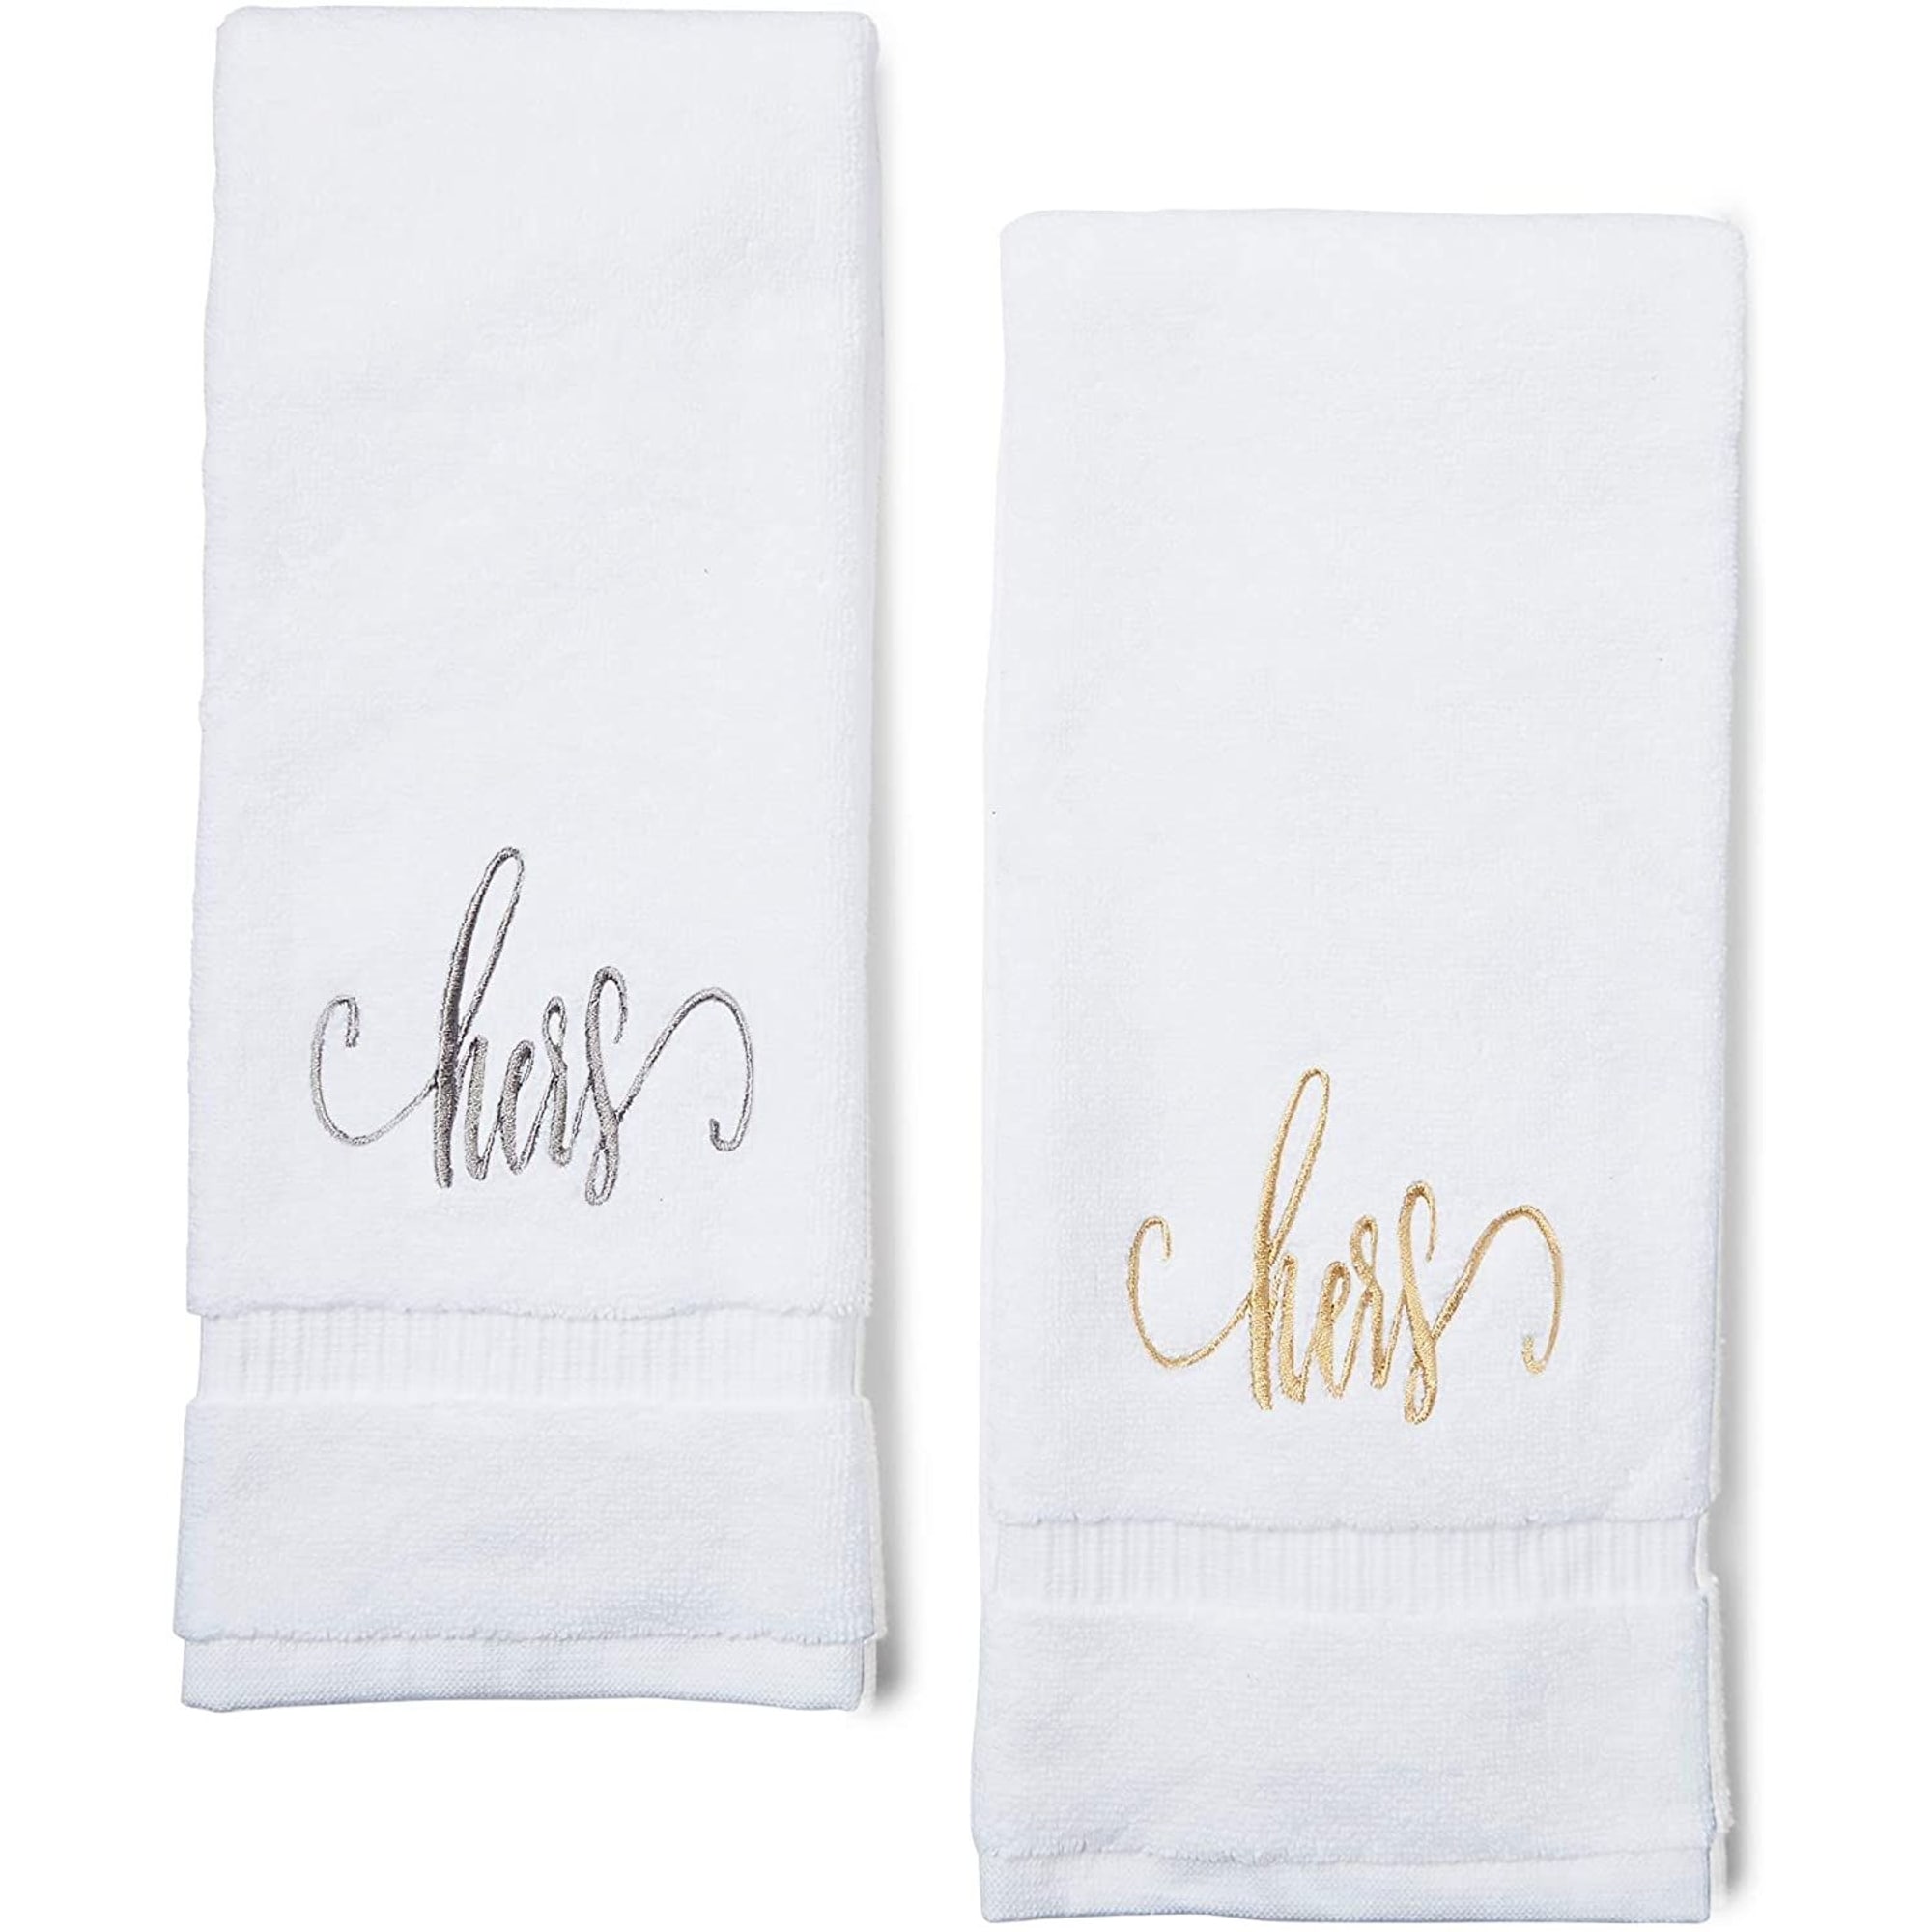 FRENCH ANTIQUE FRAME with Monogram Embroidered Linen Cloth Napkins and  Guest Bath Hand Towels - Wedding Keepsake for Special Occasions